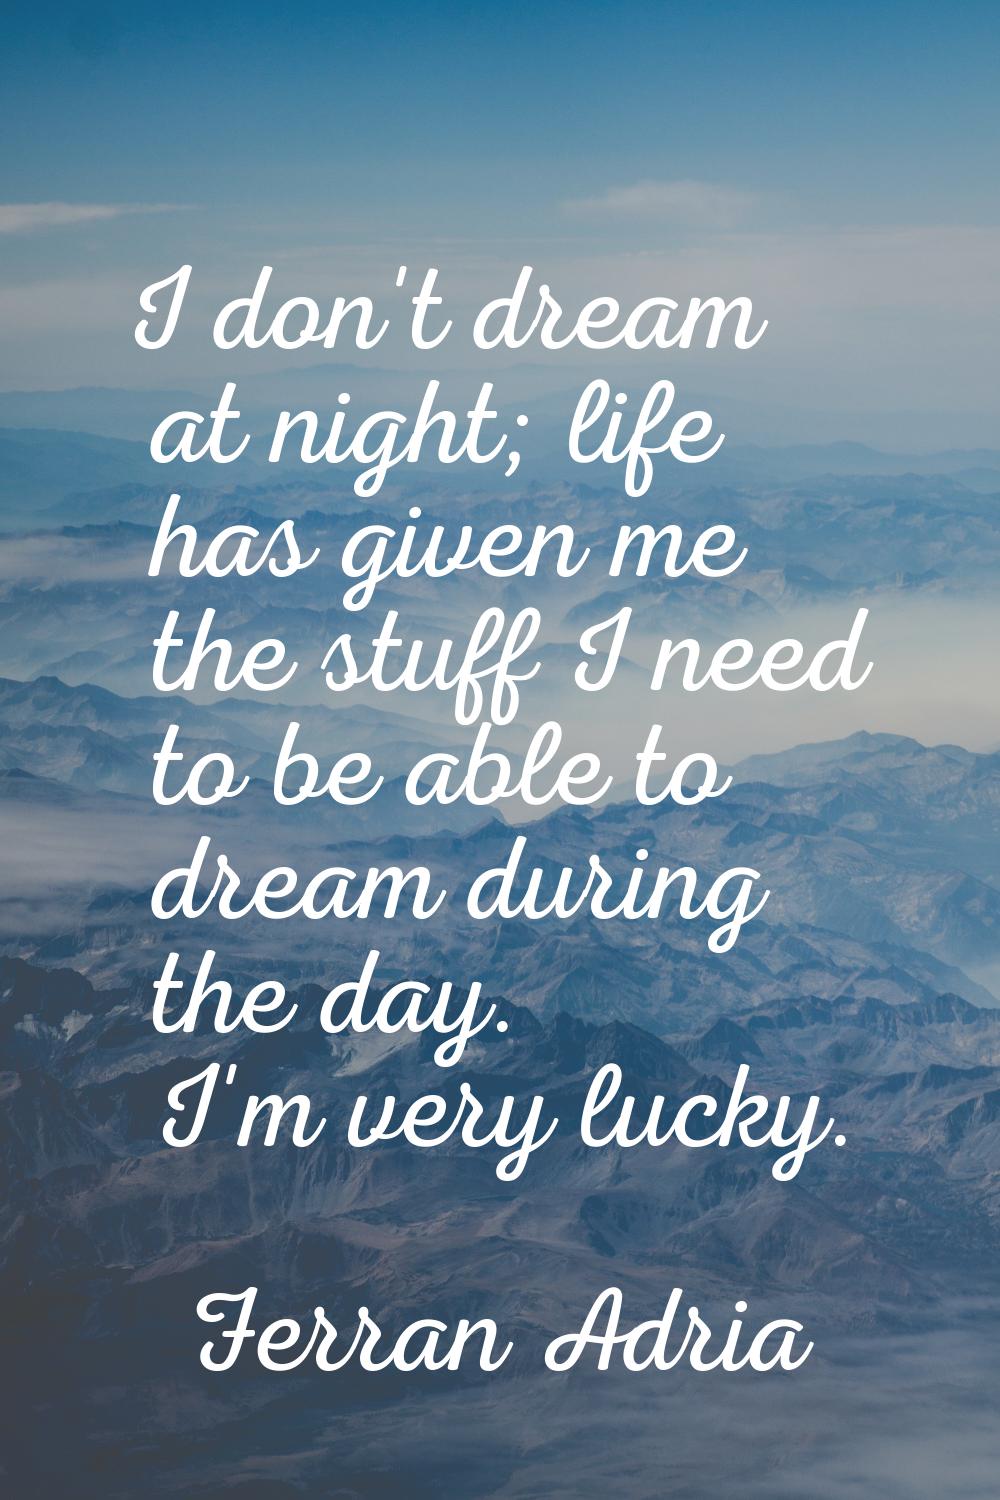 I don't dream at night; life has given me the stuff I need to be able to dream during the day. I'm 